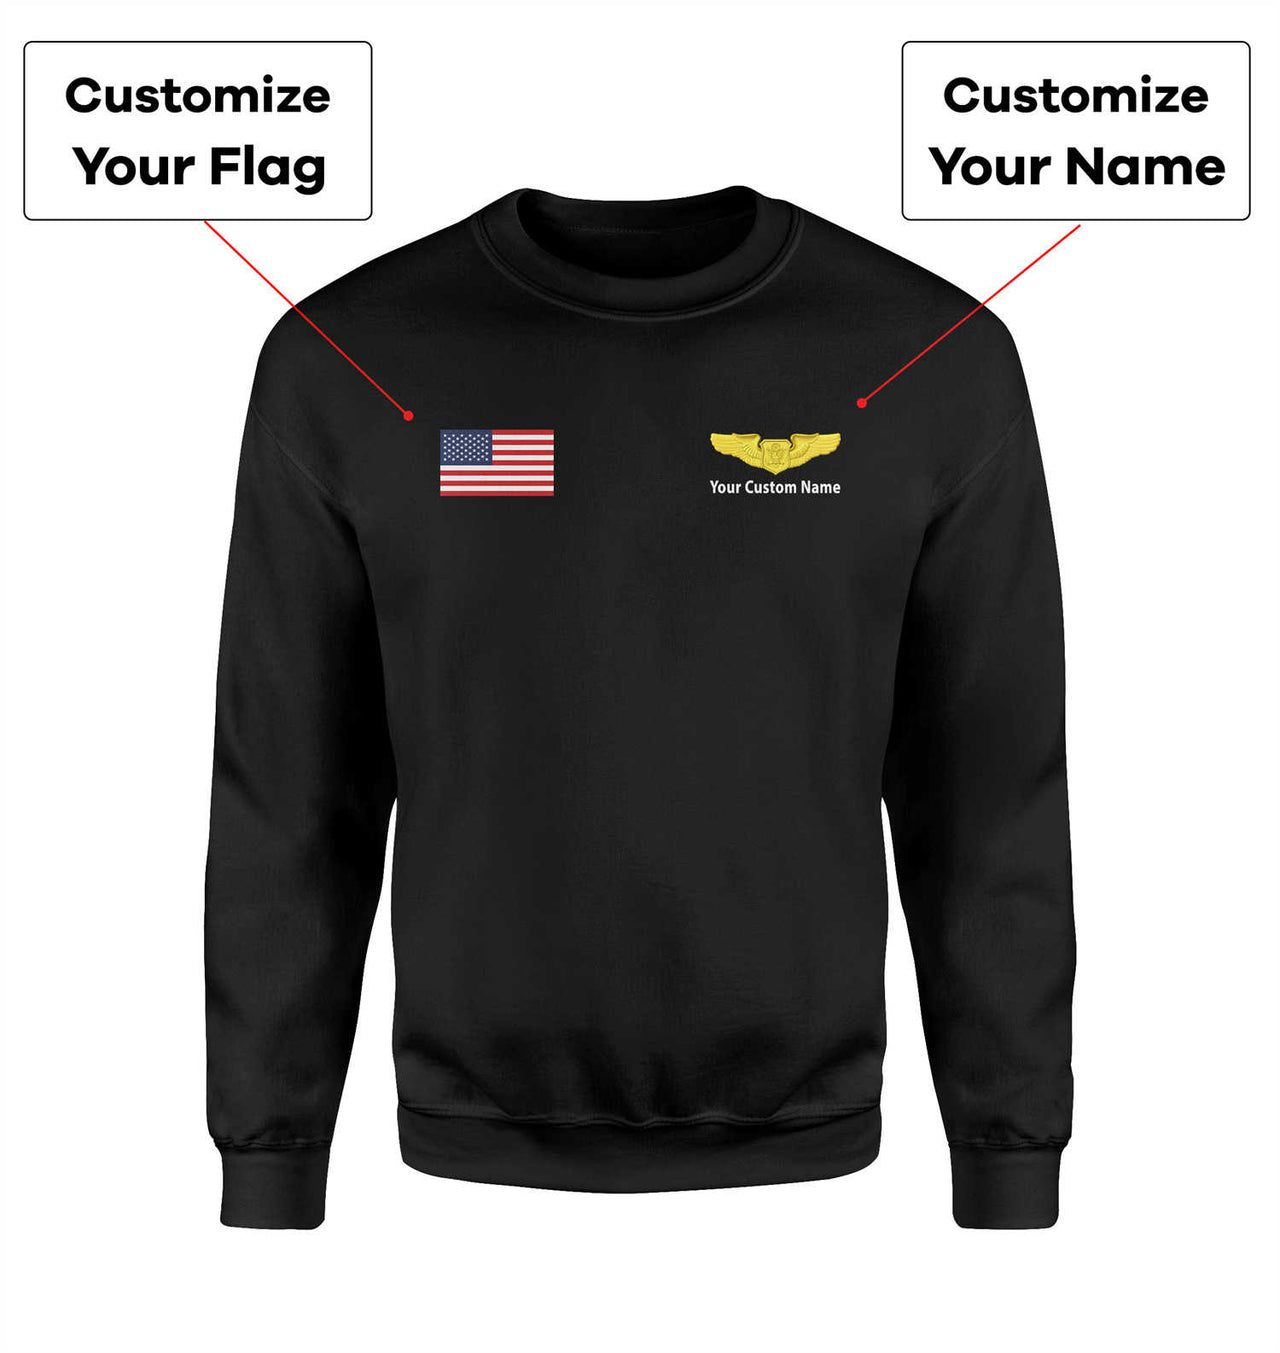 Custom Flag & Name with (Special US Air Force) Designed 3D Sweatshirts